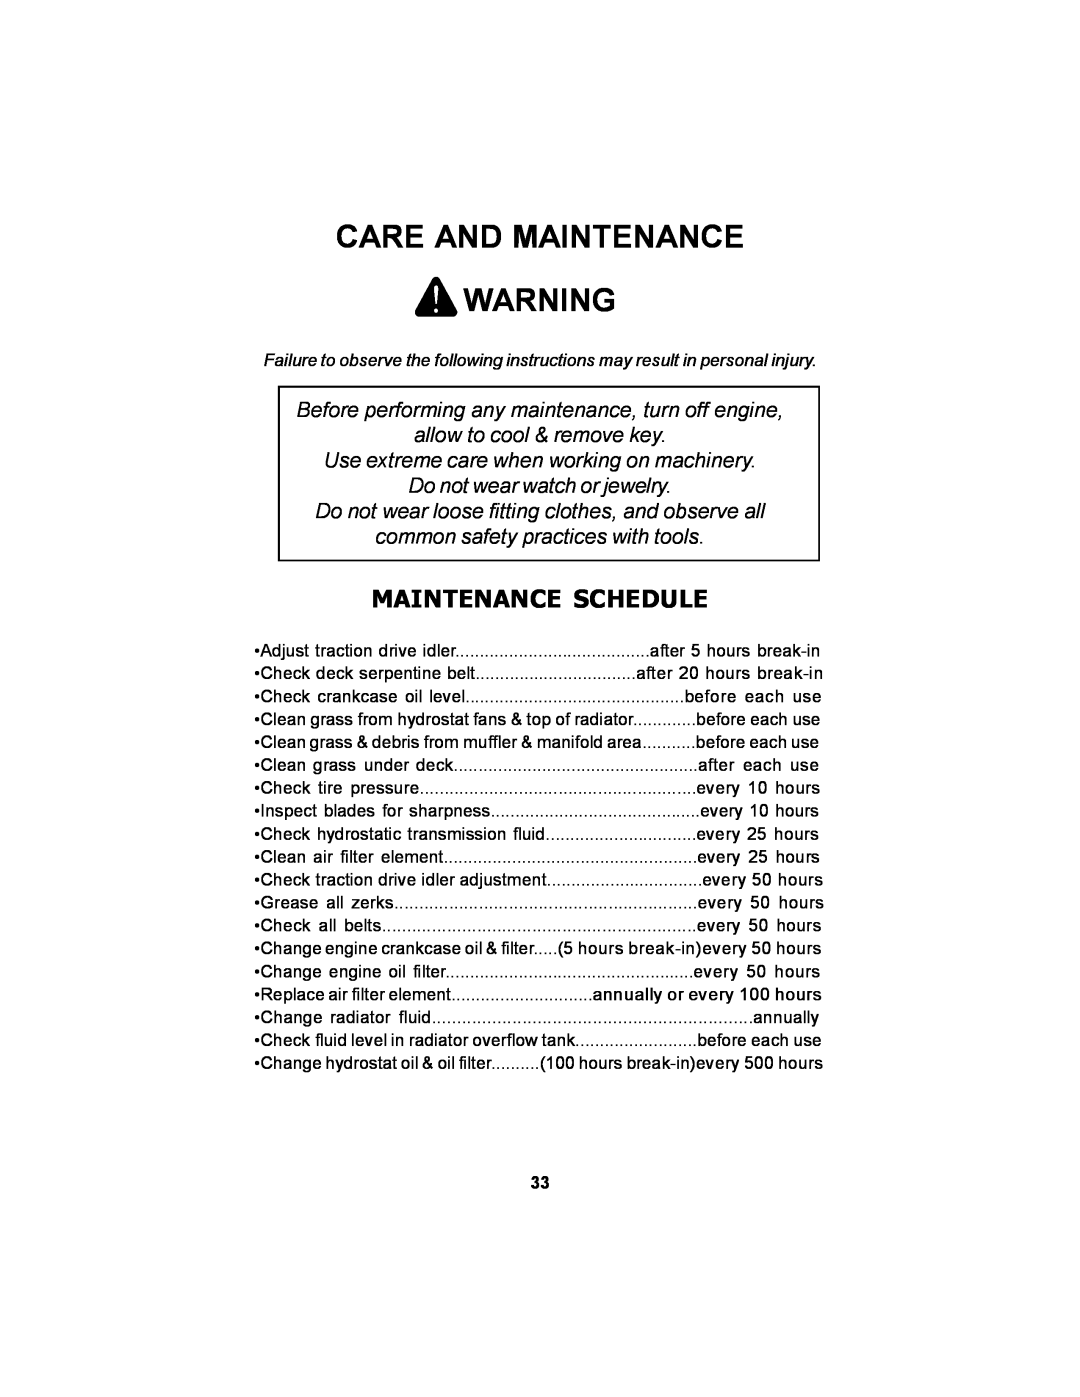 Dixon 18626-106 manual Care And Maintenance, Maintenance Schedule, Before performing any maintenance, turn off engine 